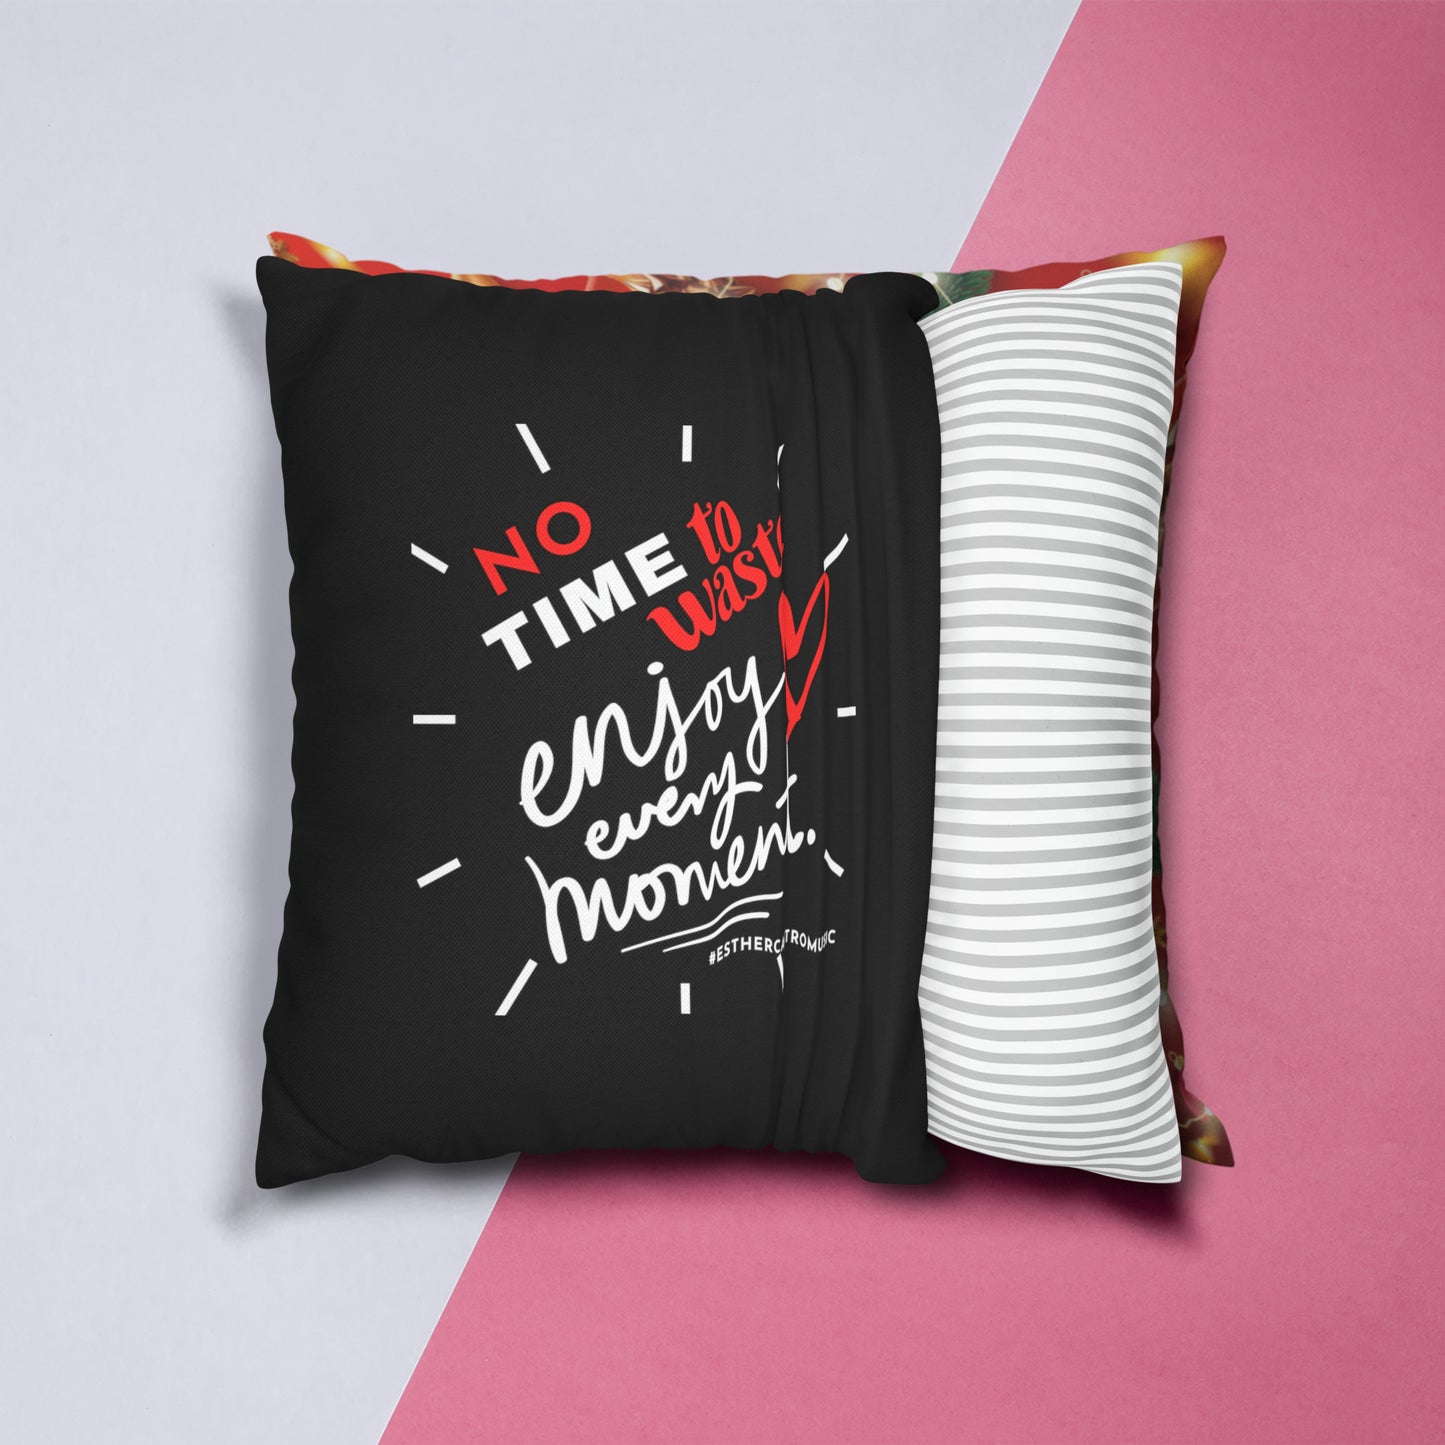 Spun Polyester Square Pillow Case, No Time to Waste-Enjoy every moment